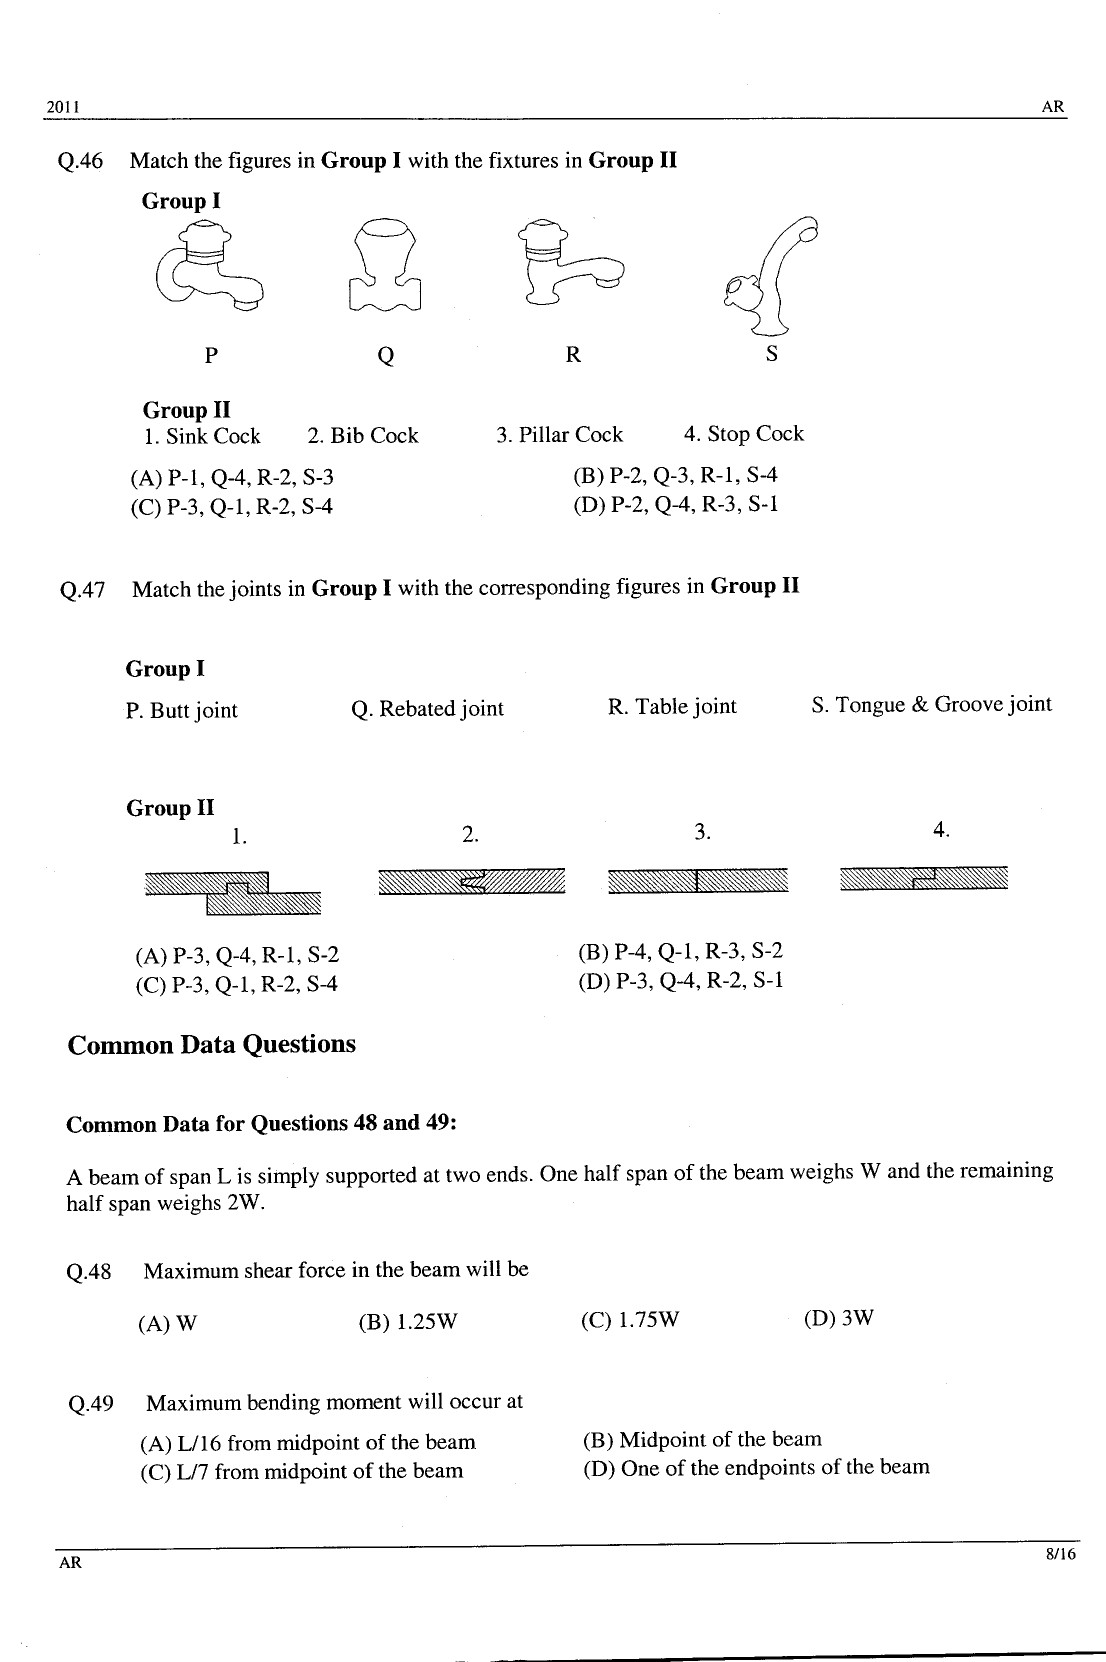 GATE Exam Question Paper 2011 Architecture and Planning 8